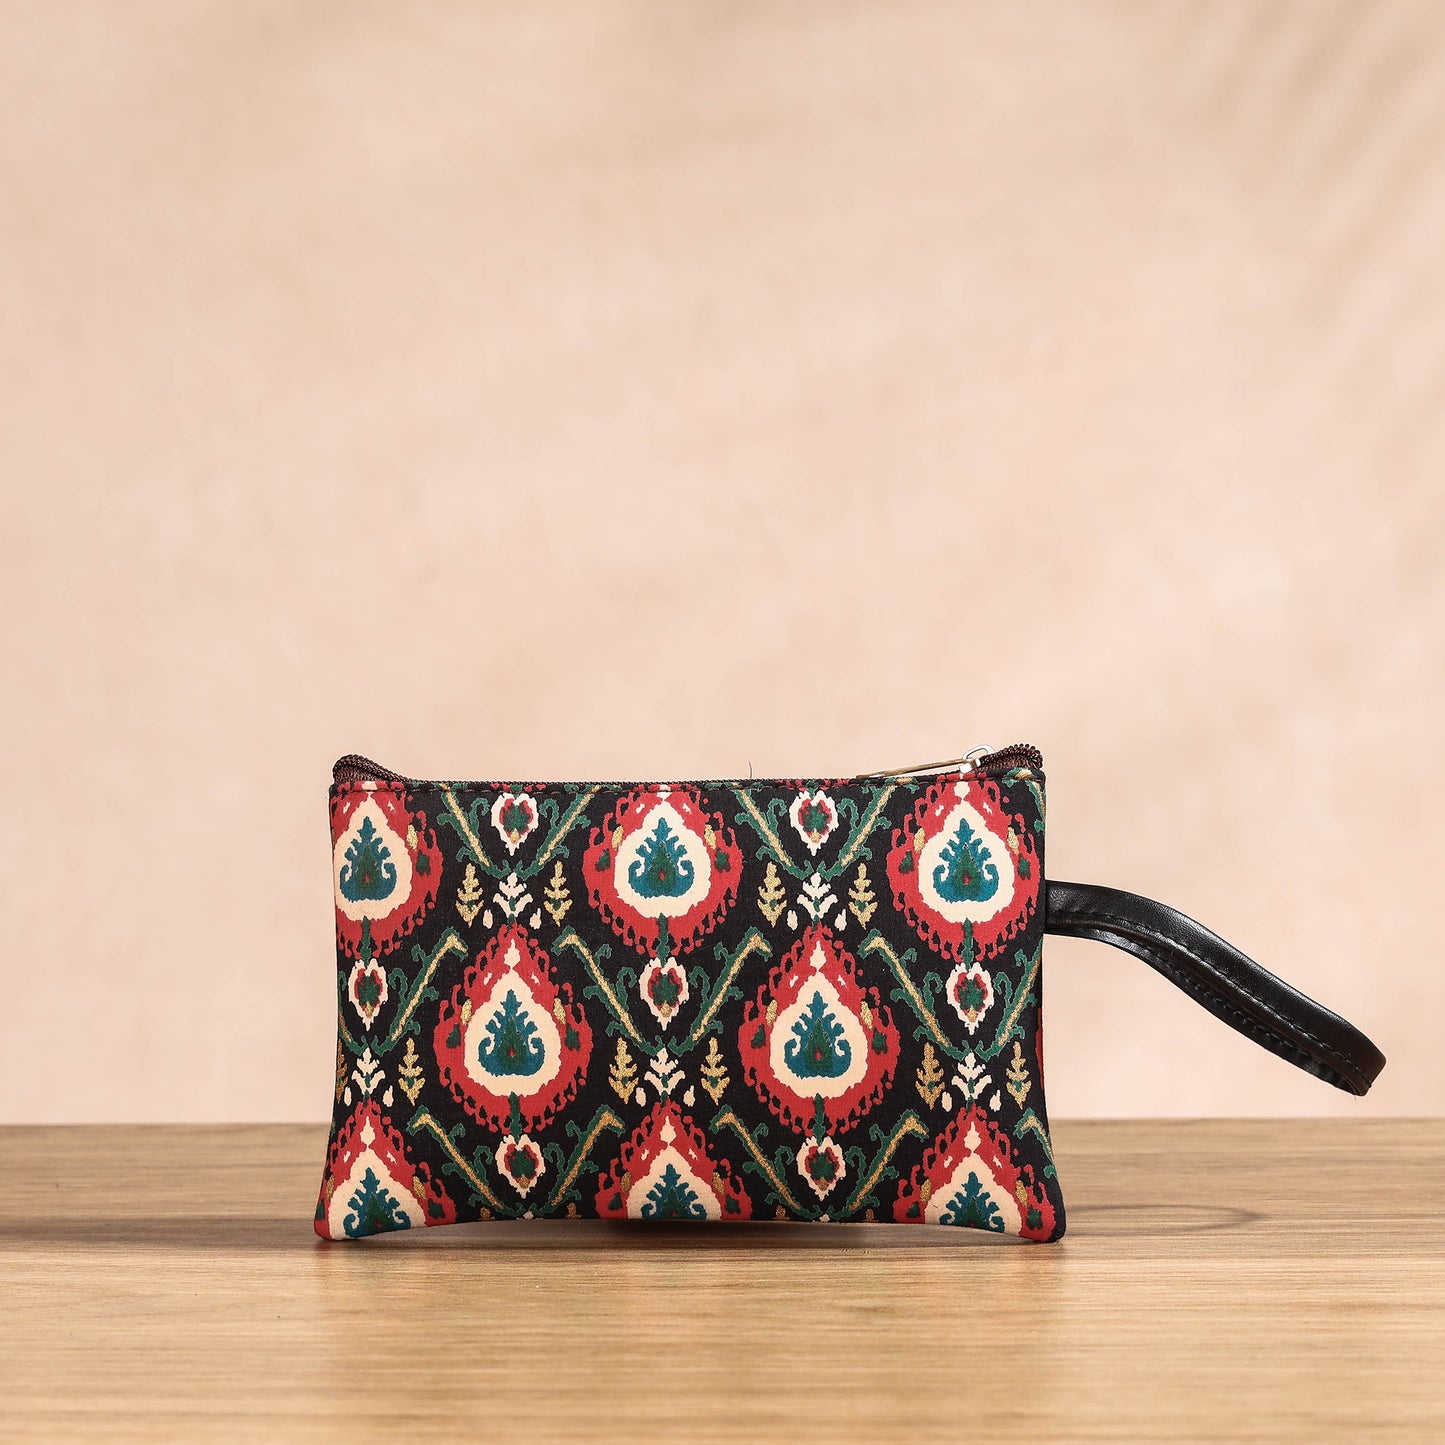 Handcrafted Printed Cotton Hand Bag (Set of 2)